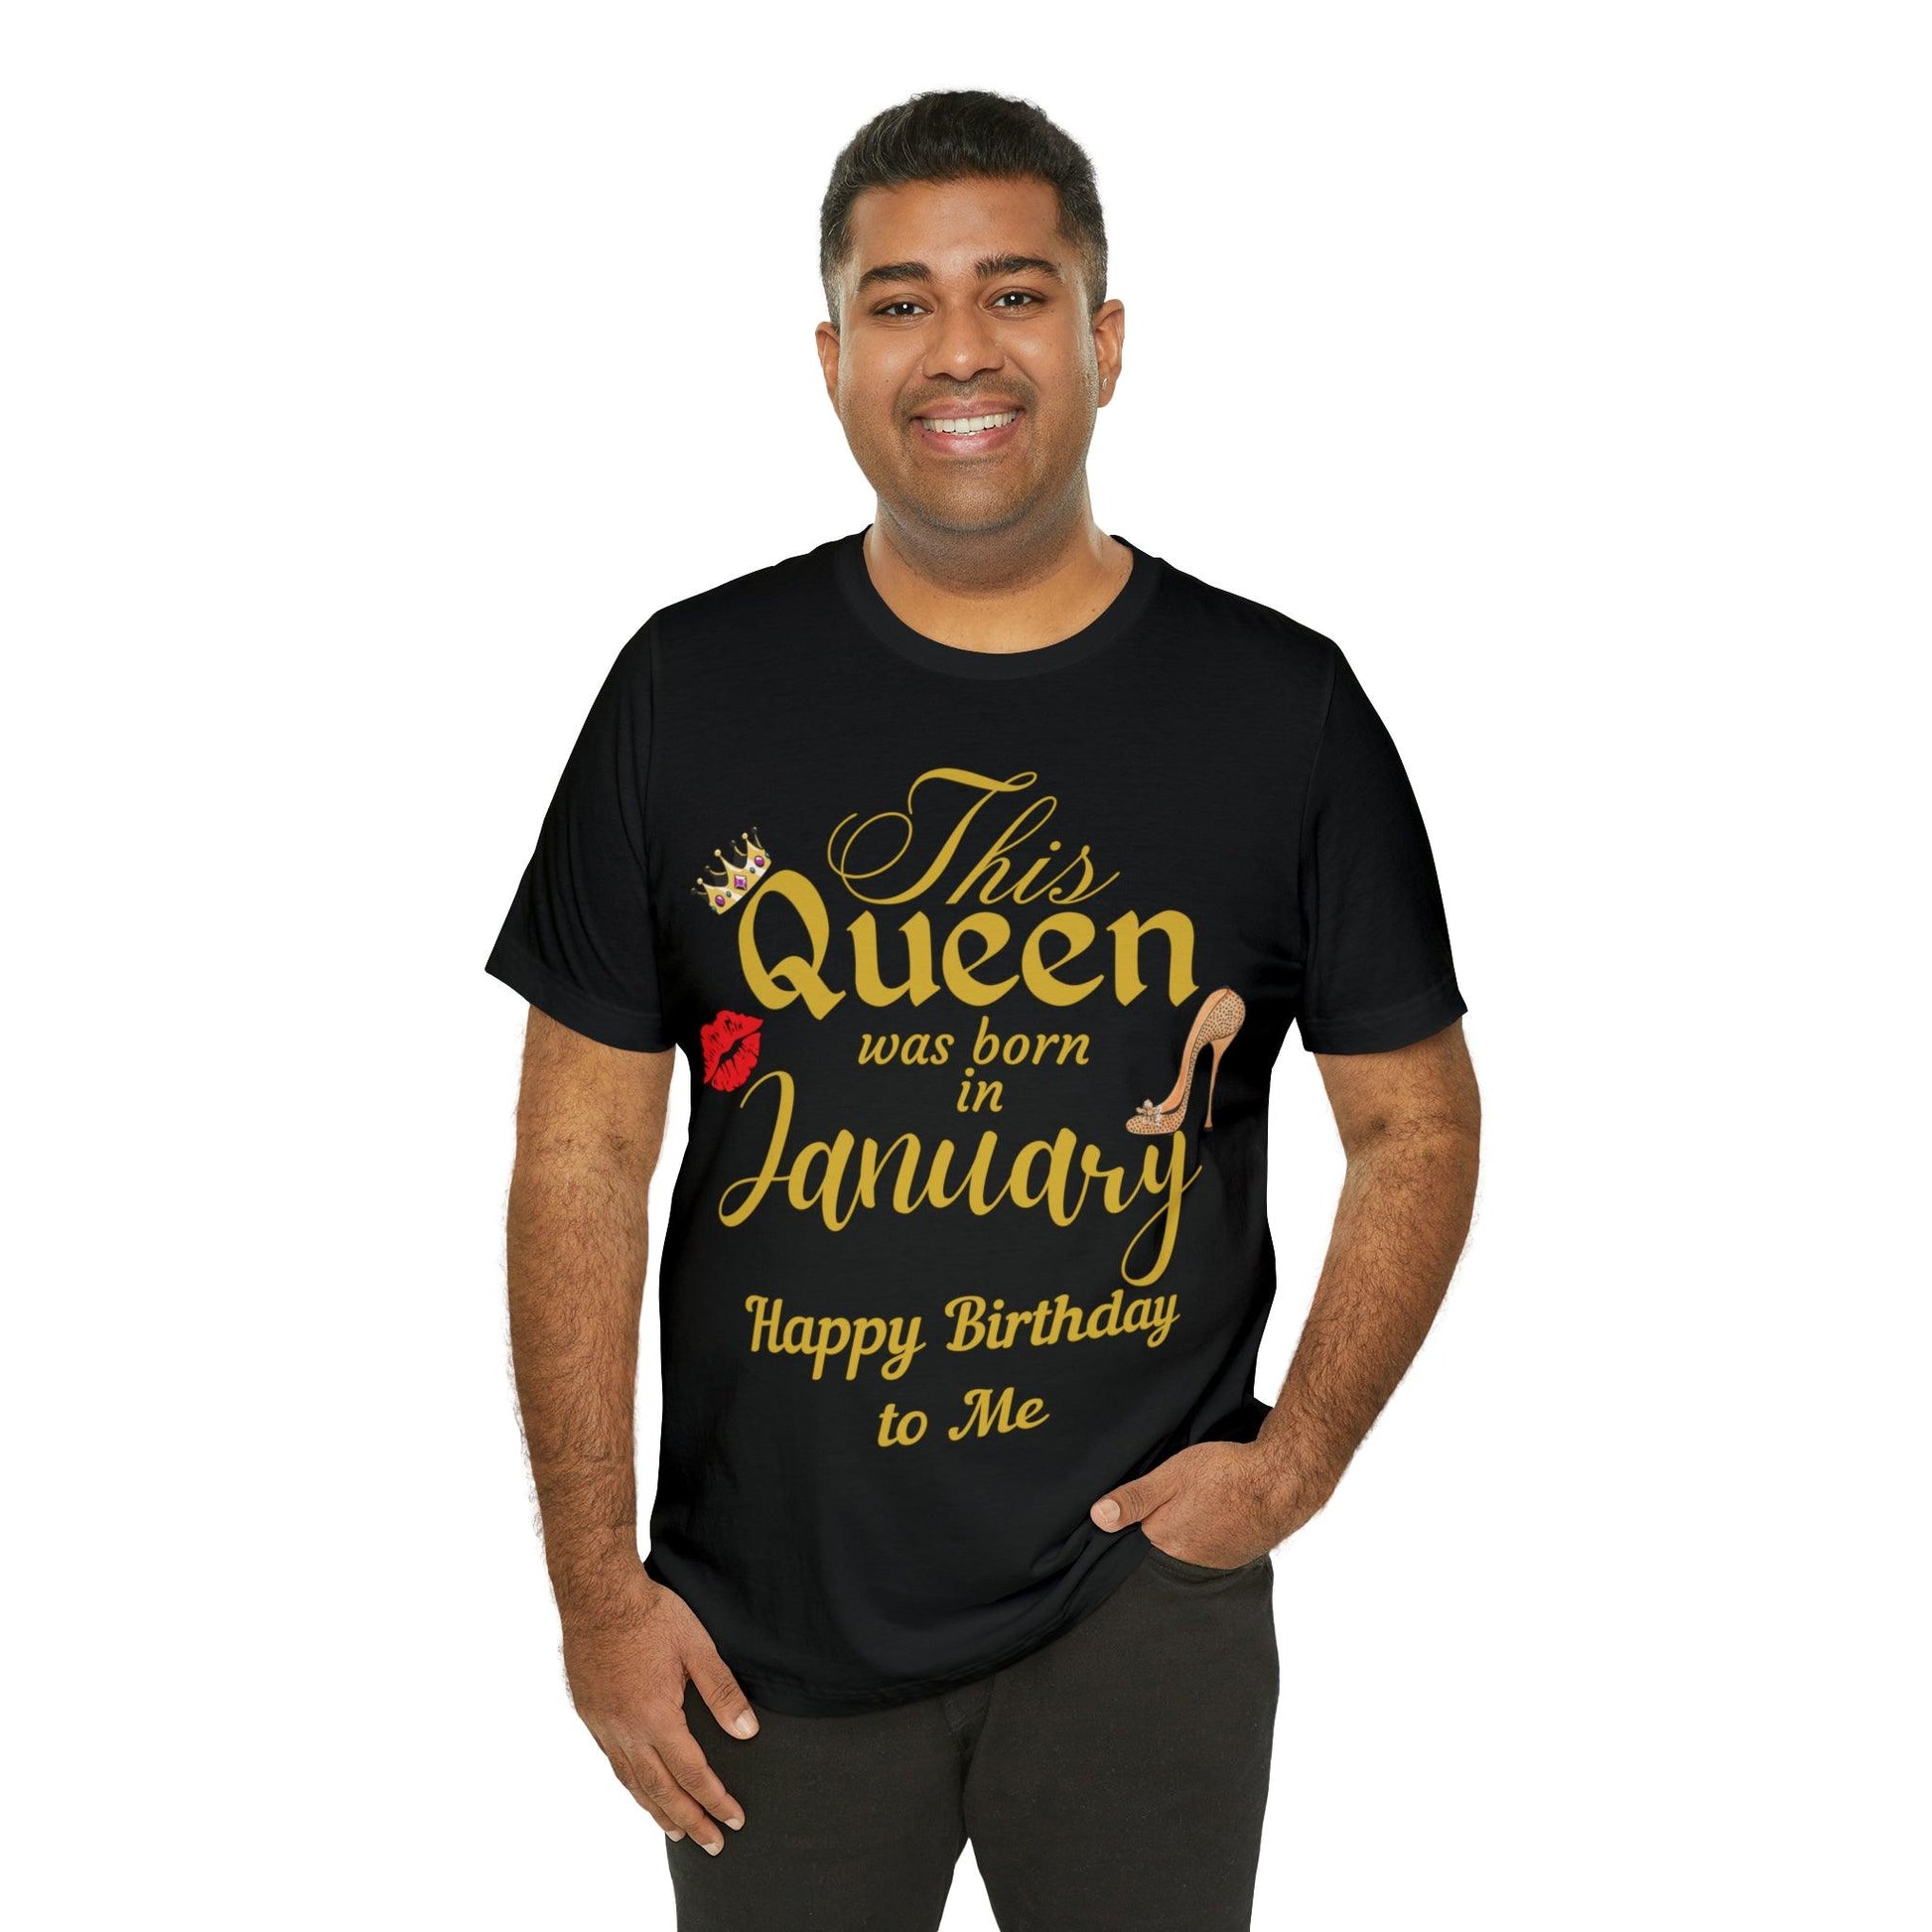 Birthday Queen Shirt, Gift for Birthday, This Queen was born in January Shirt, Funny Queen Shirt, Funny Birthday Shirt, Birthday Gift - Giftsmojo